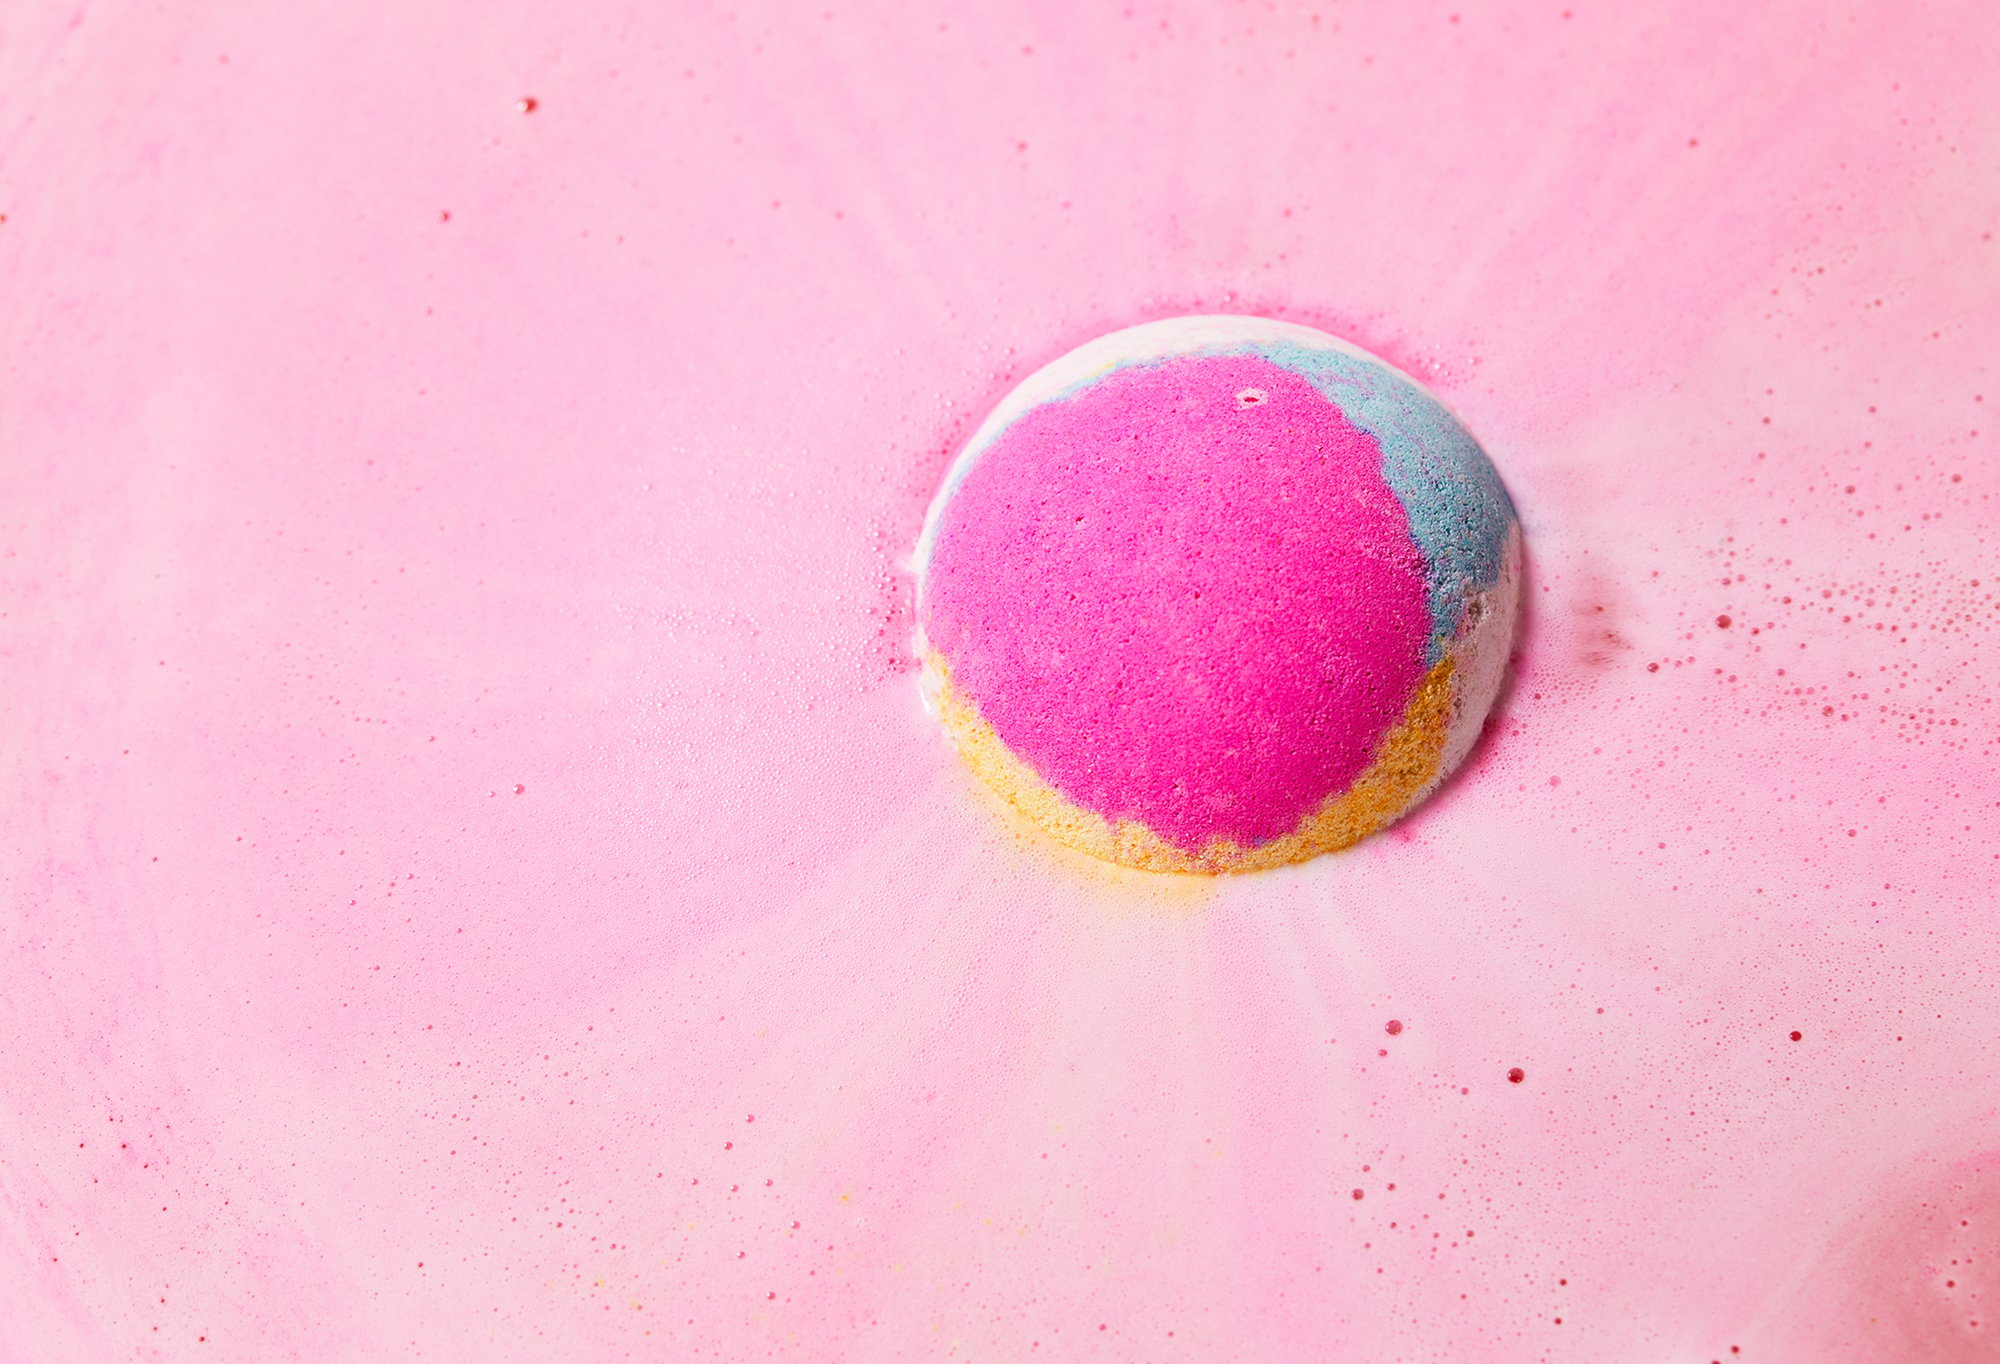 Pink, blue, yellow and white Marshmallow bath bomb floats among velvety, pink bubbles.